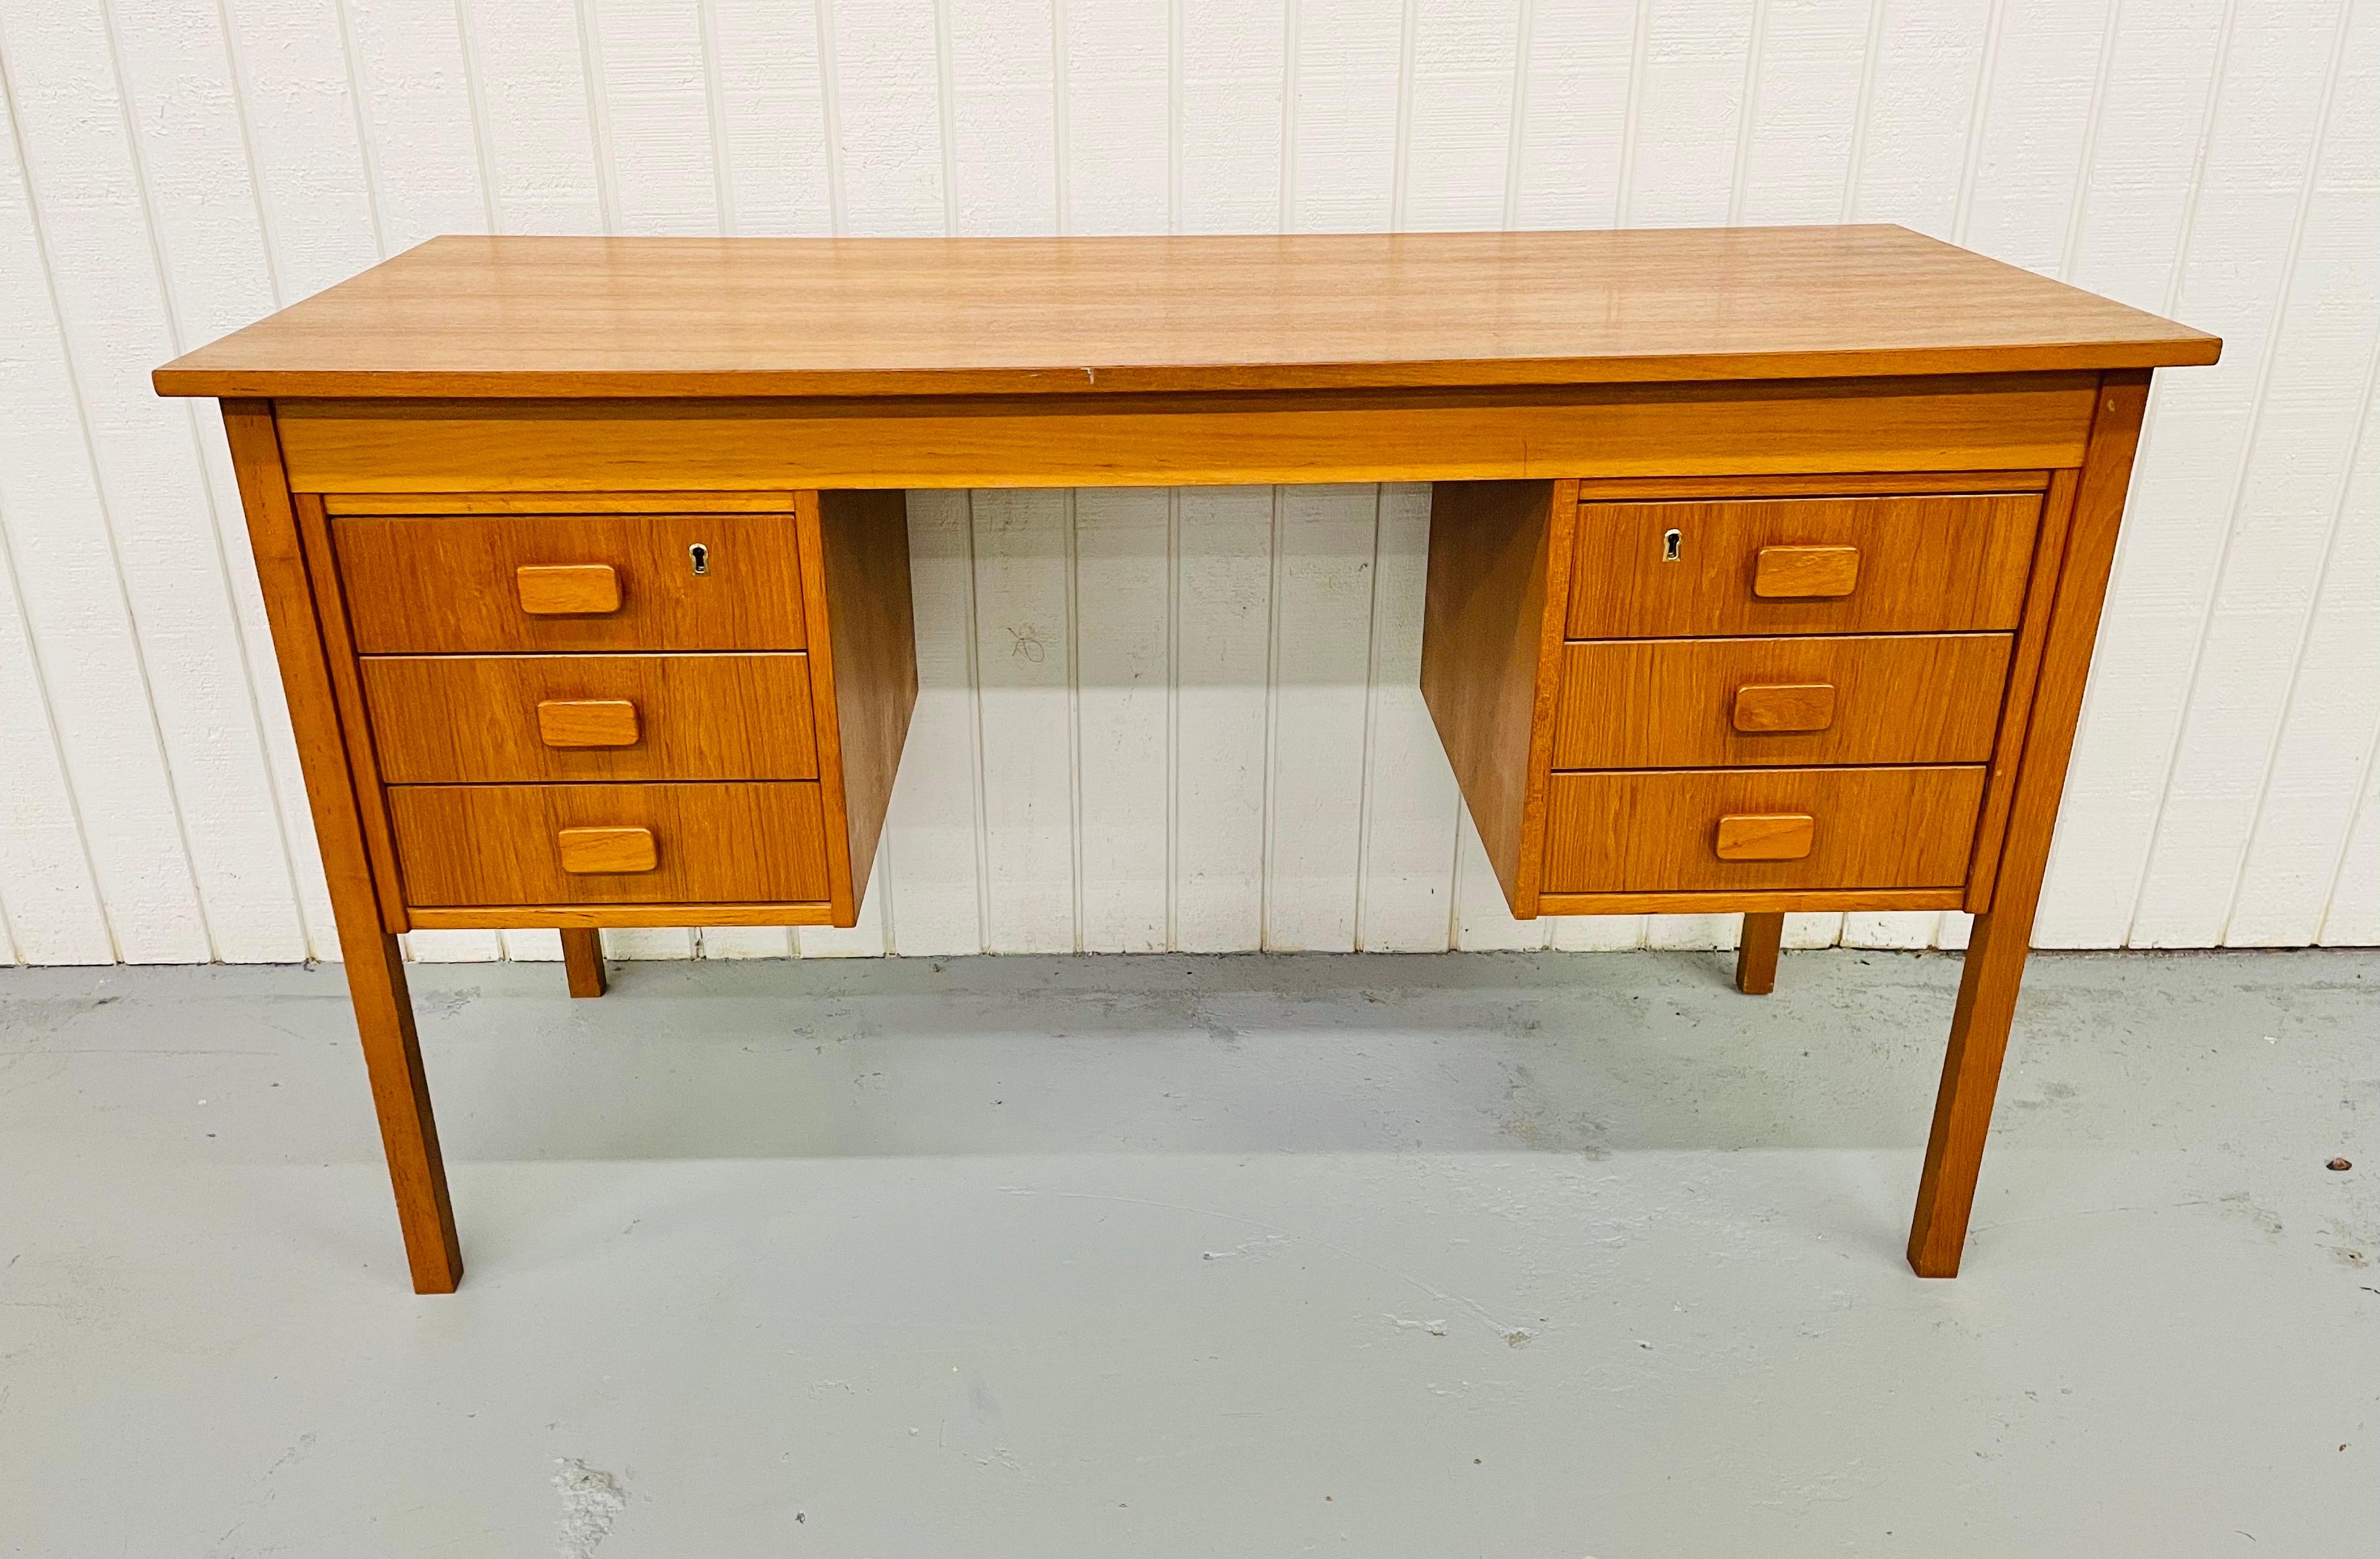 This listing is for a beautiful Danish Modern teak writing desk! Featuring six drawers for storage, sculpted wood pulls on each drawer, and a large top with plenty of space for work or school!.